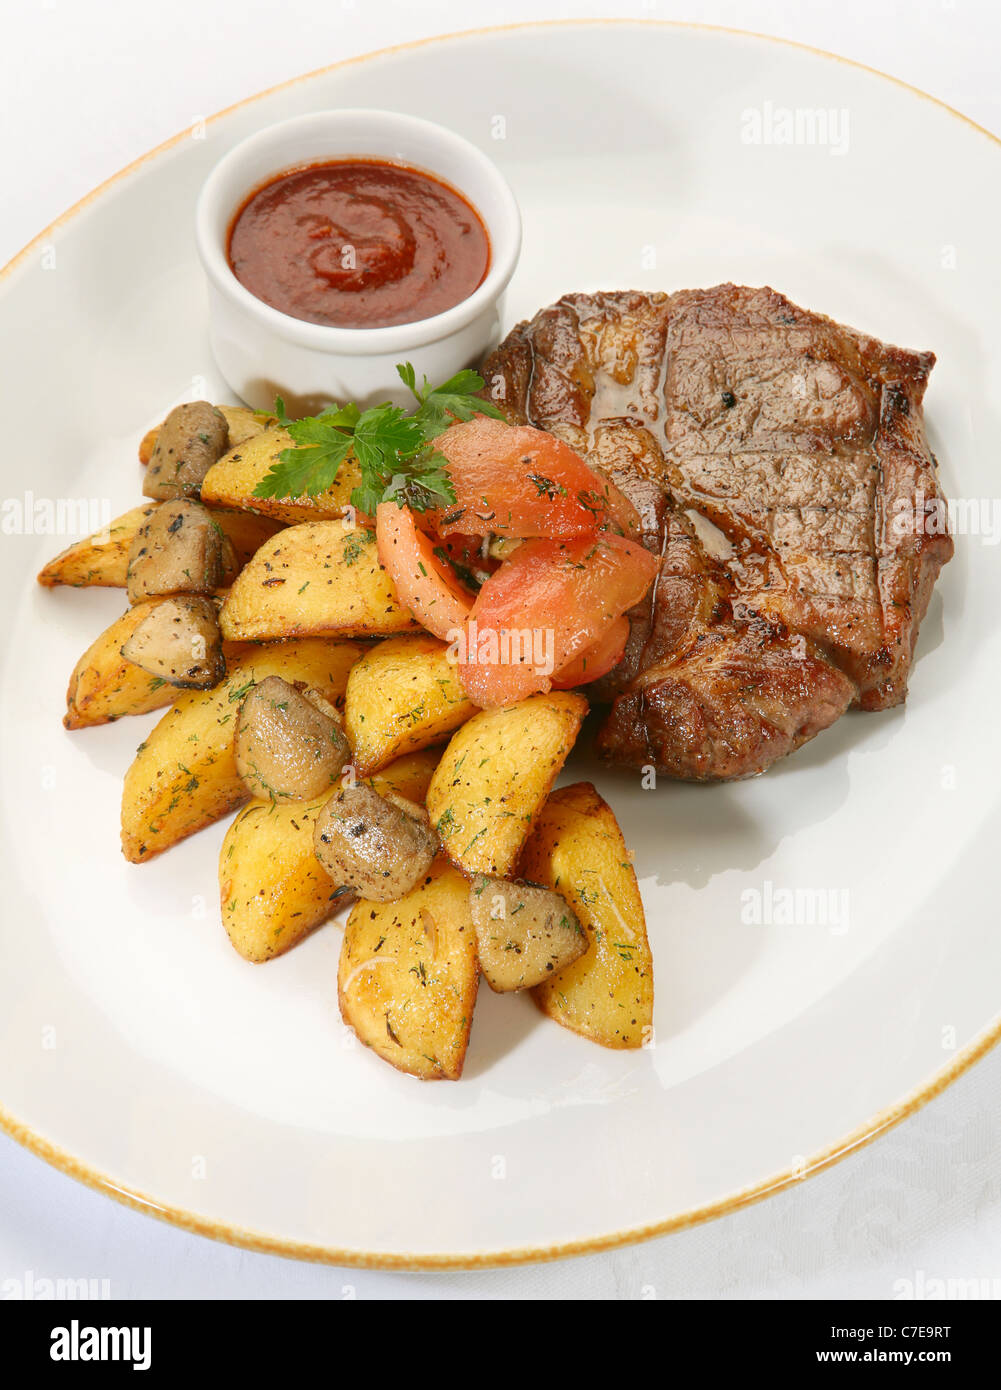 Fried veal steak with potato and sauce Stock Photo